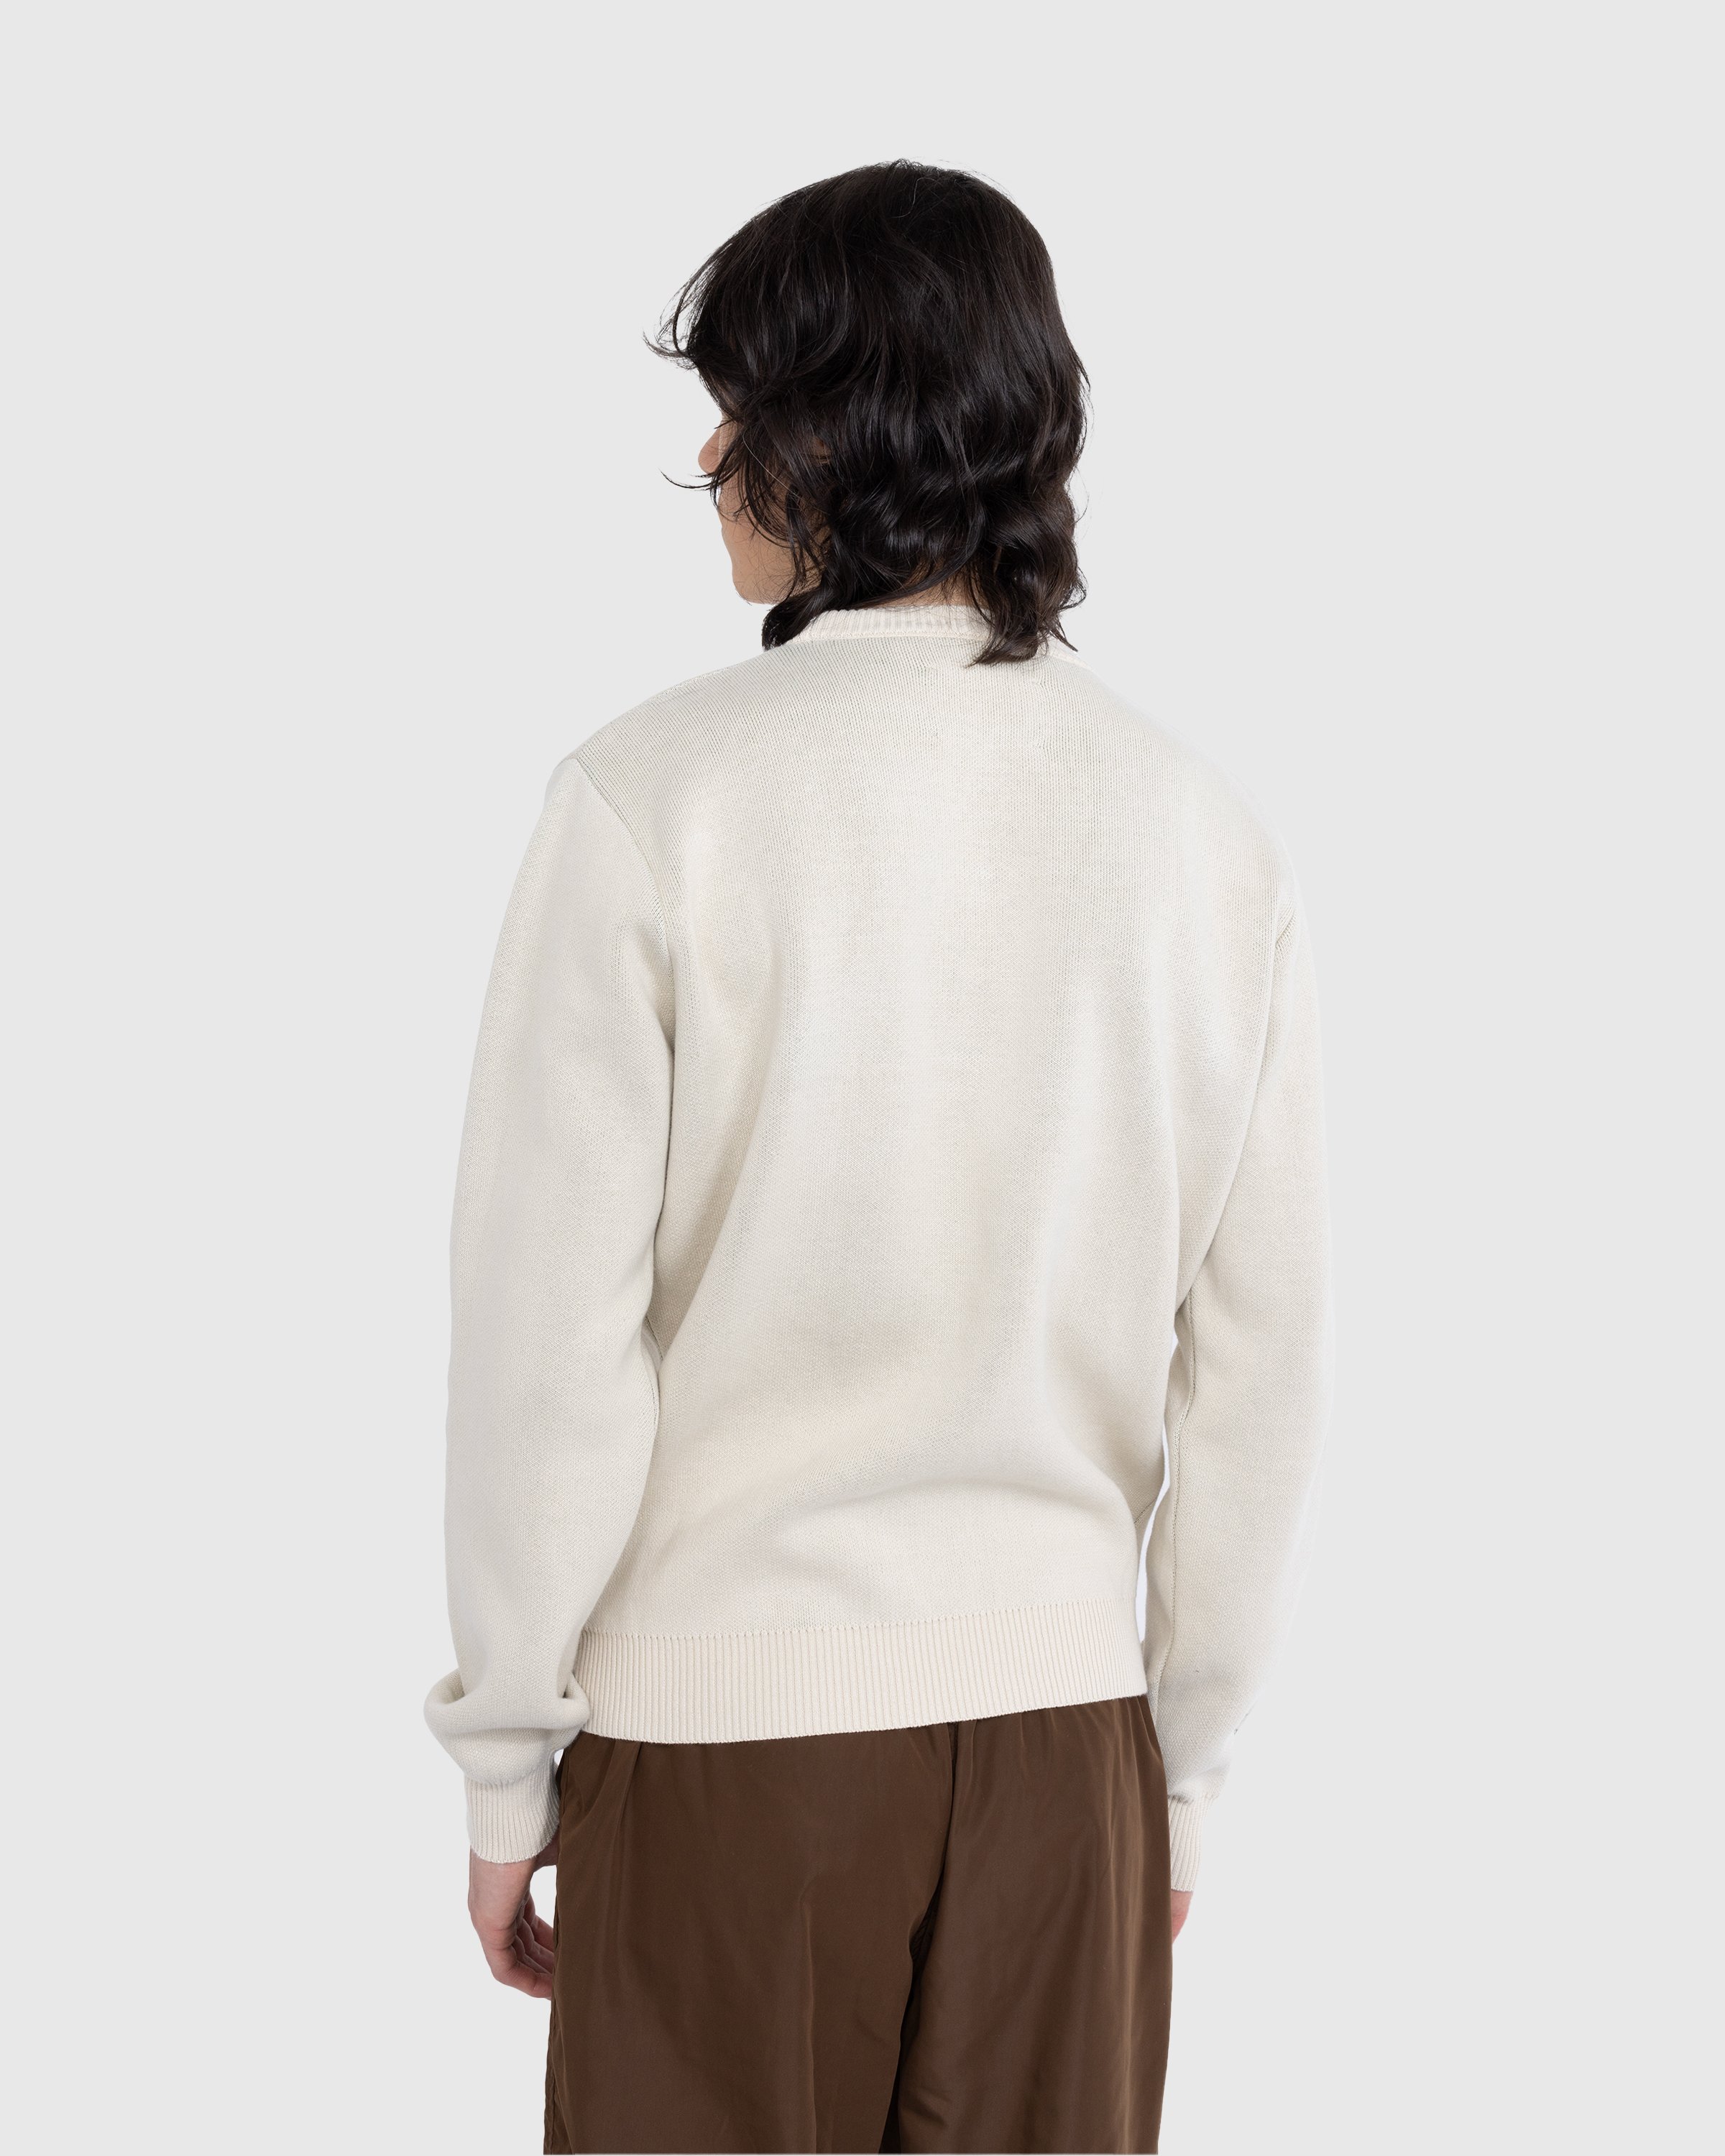 Highsnobiety - Not in Paris 5 Knitted Sweater - Clothing - Beige - Image 3